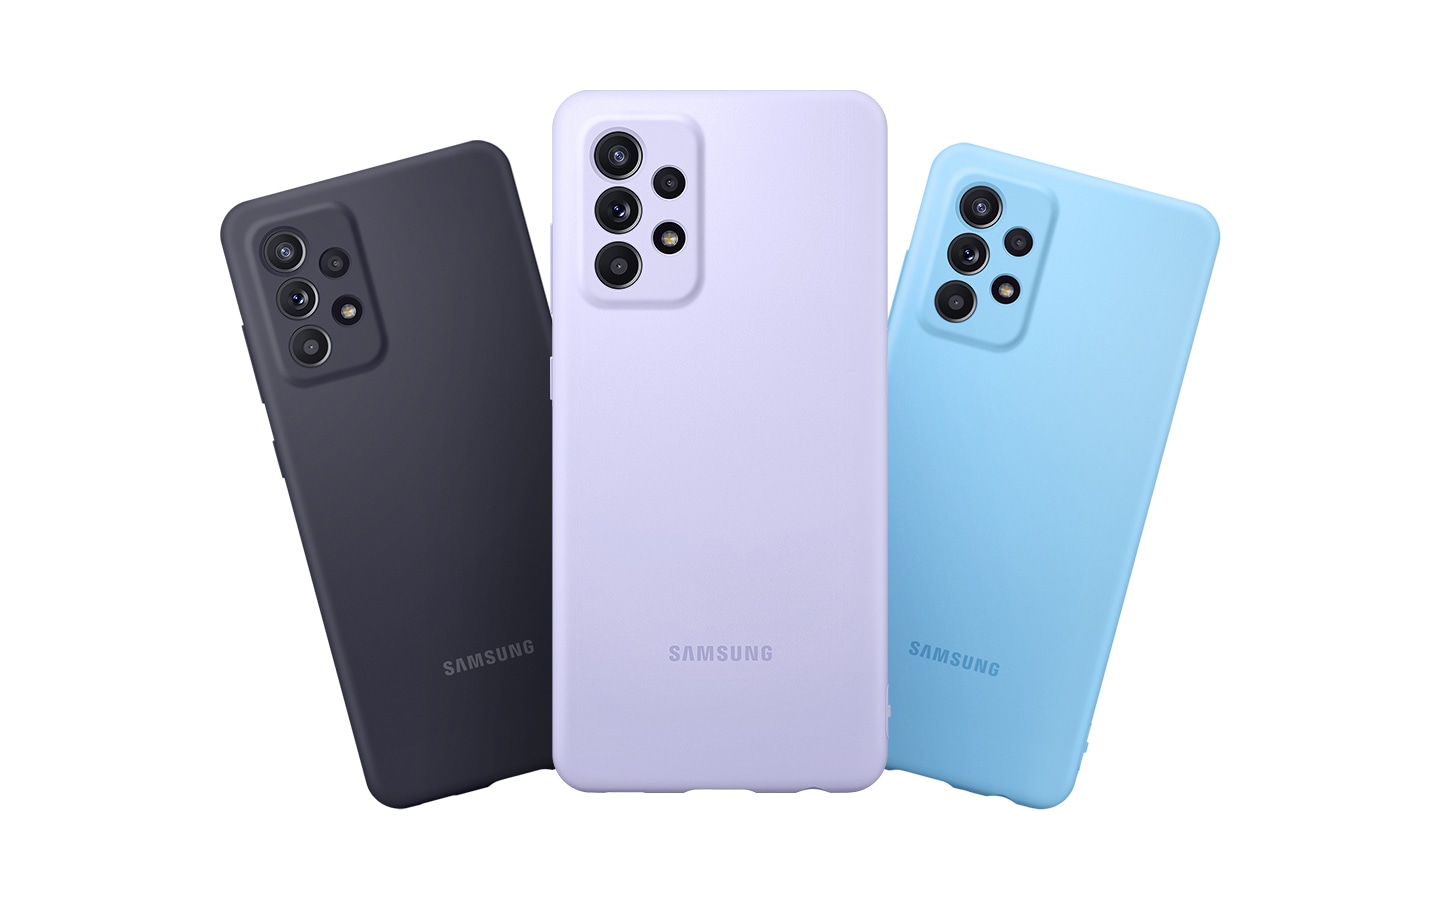 Three Galaxy A52 with Silicone Covers fanned out. Three seen from the rear to show the rear camera and Silicone Cover's colors Black, Violet, Blue.